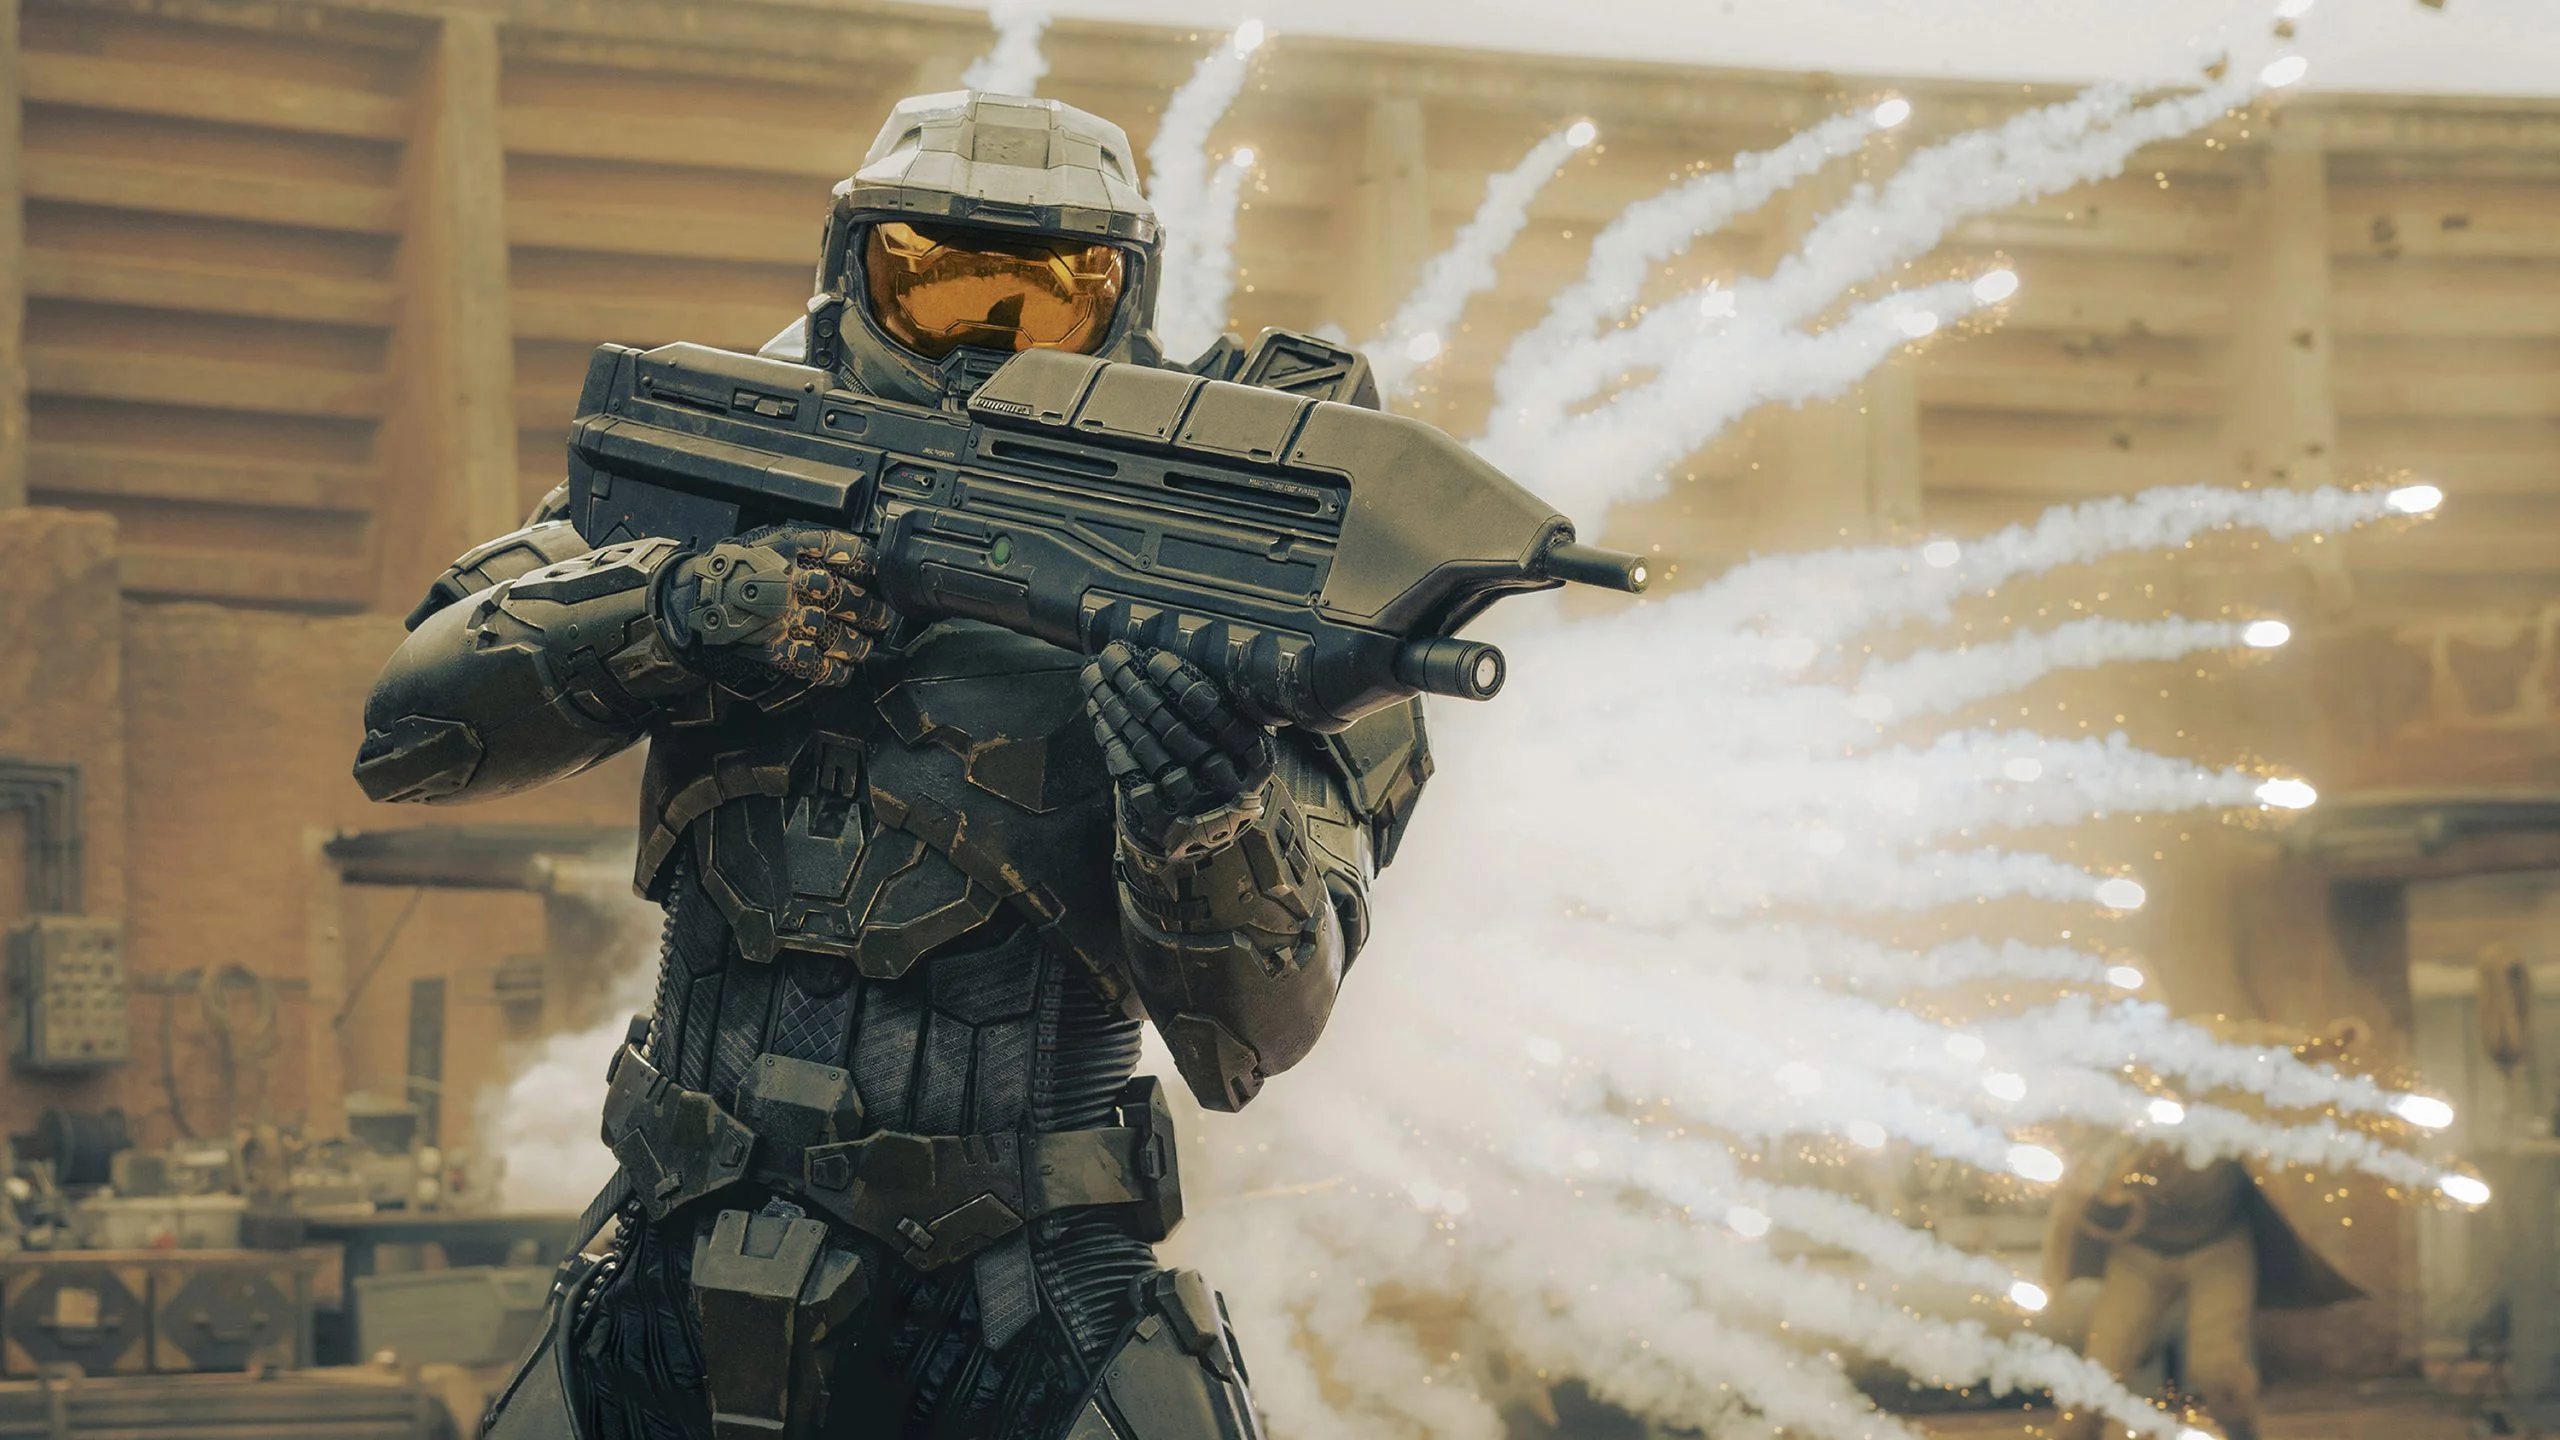 The premiere date for the second season of the Halo series has been leaked online